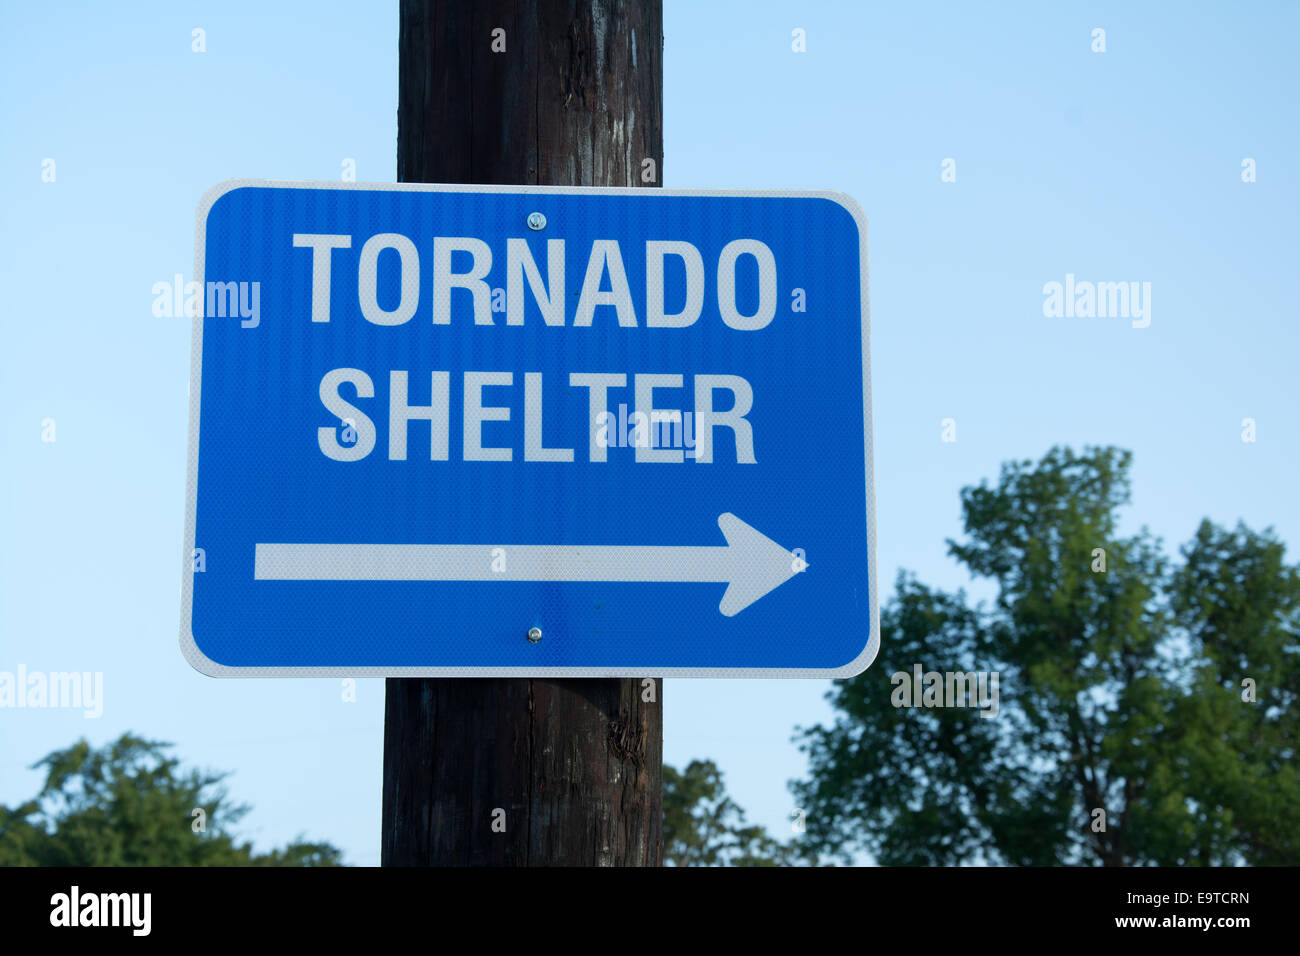 Tornado shelter sign to guide people to safety in tornado emergency Stock Photo